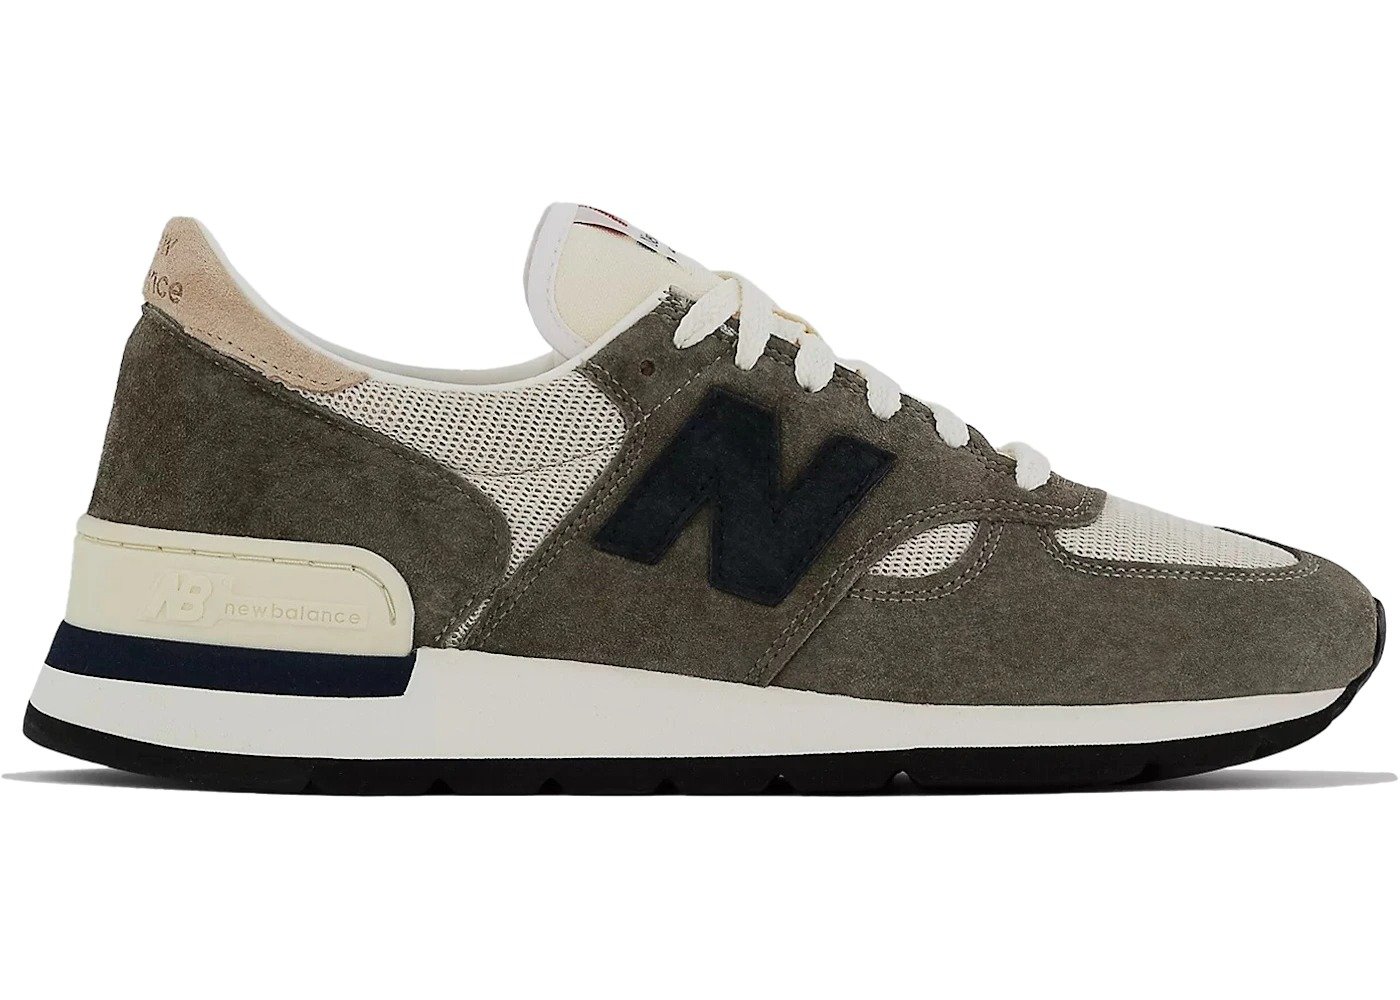 Now Available: New Balance 990v1 